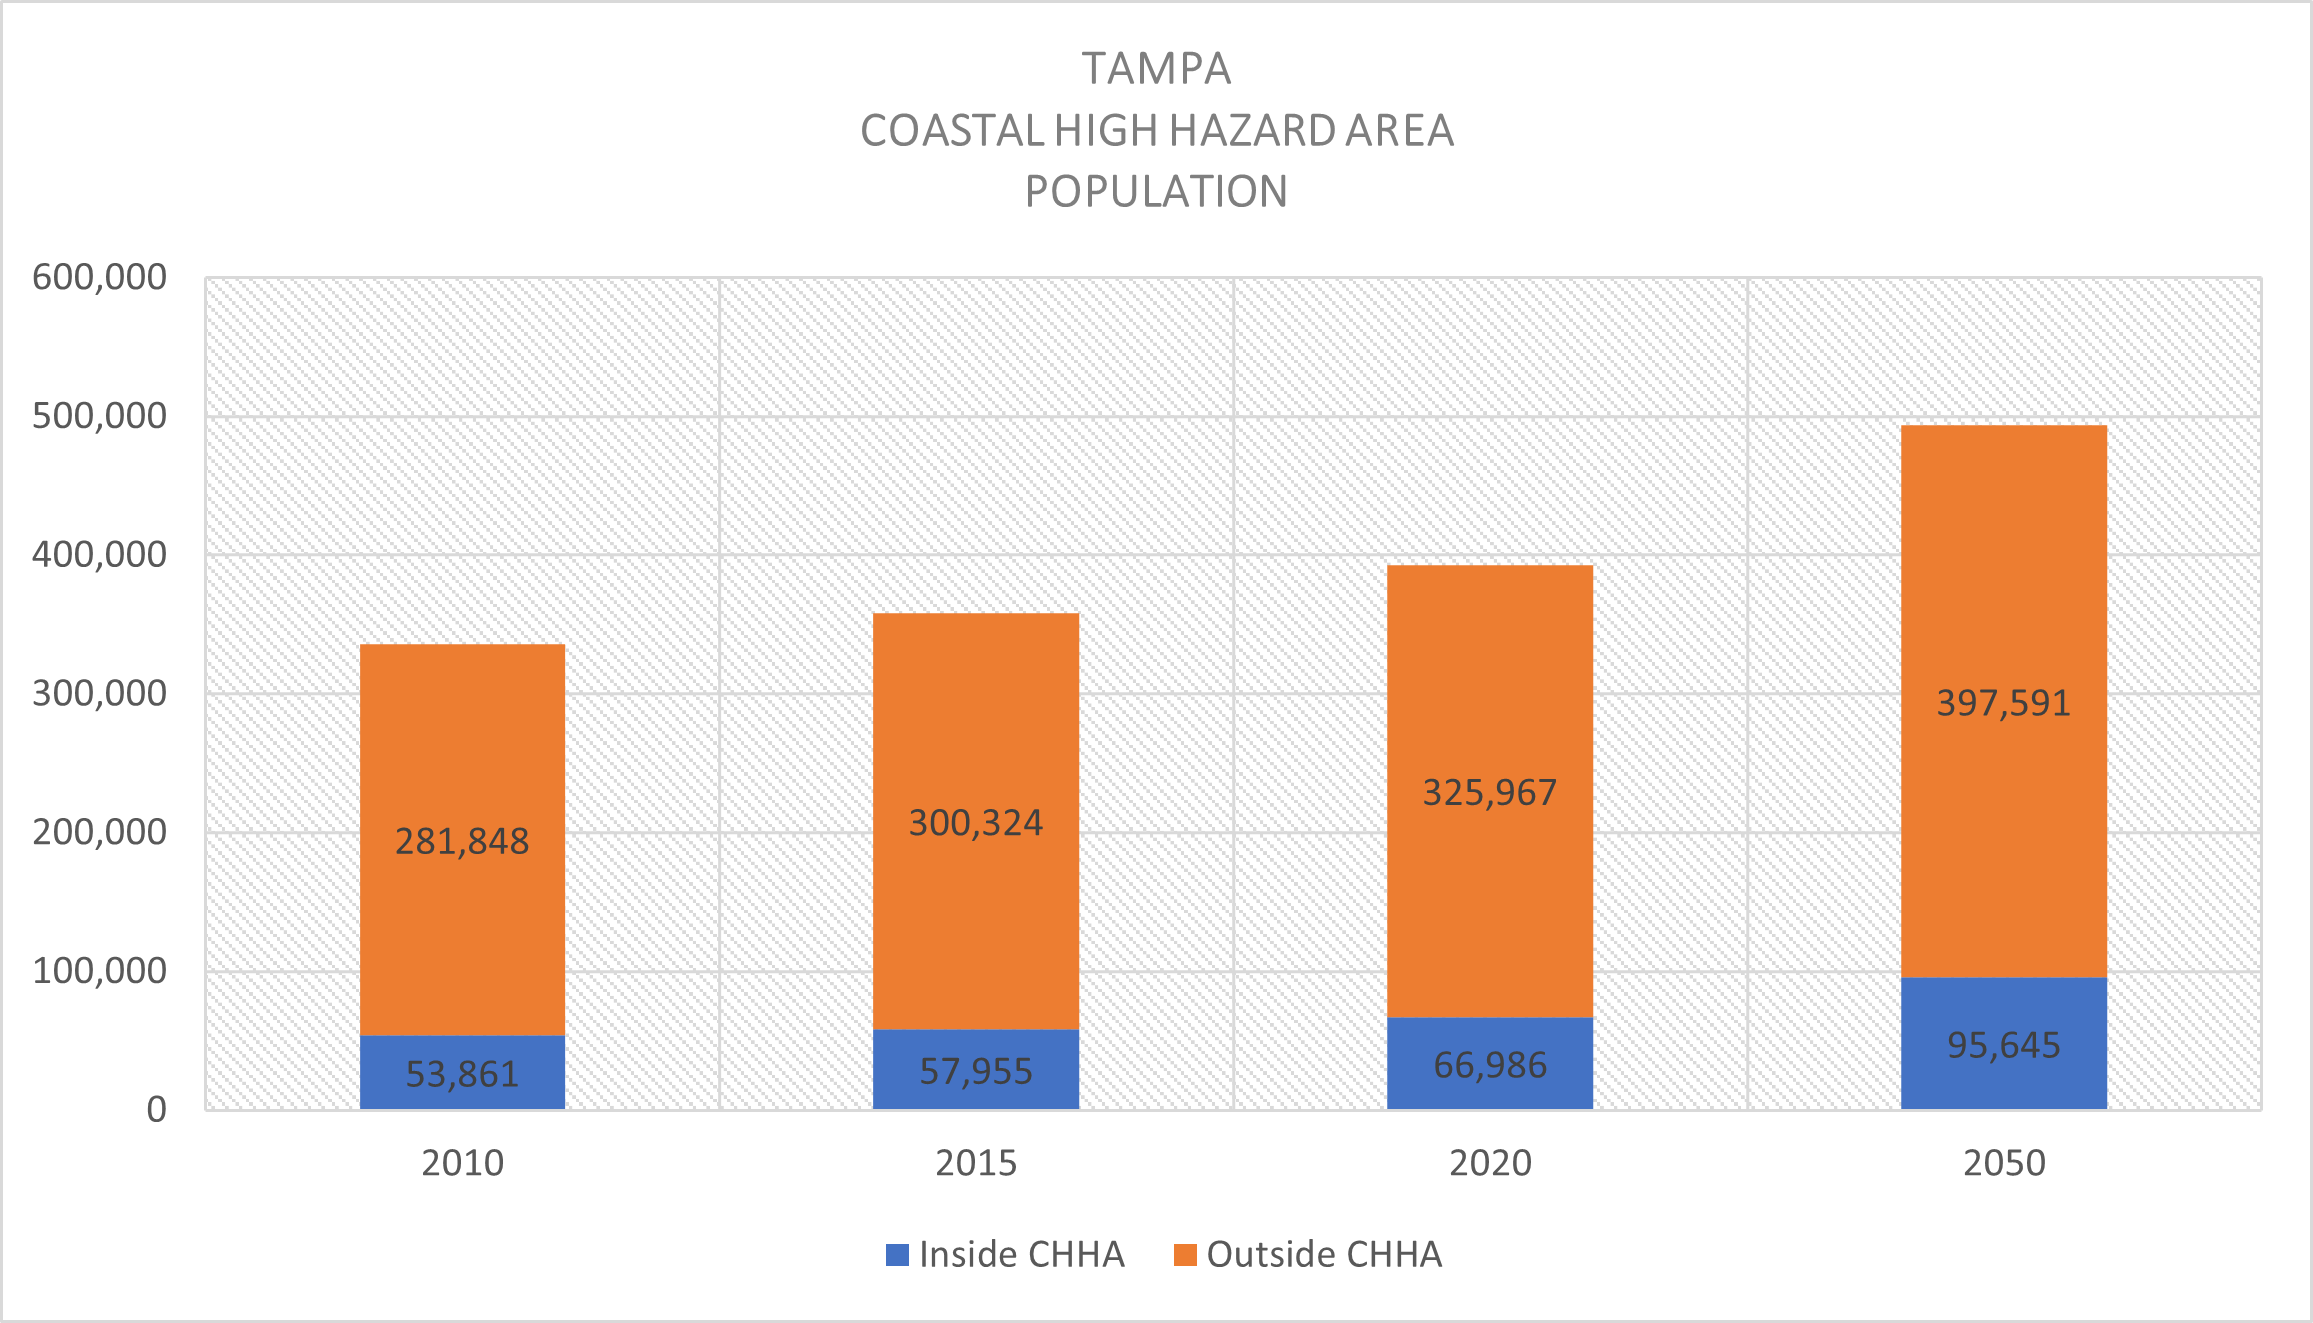 This chart shows Tampa's population inside and outside the CHHA. Currently, 66,986 people reside inside the CHHA and 325,967 people reside outside CHHA. By 2050, 95,645 are expected to reside inside the CHHA and 397,591 people are expected to reside outside the CHHA.